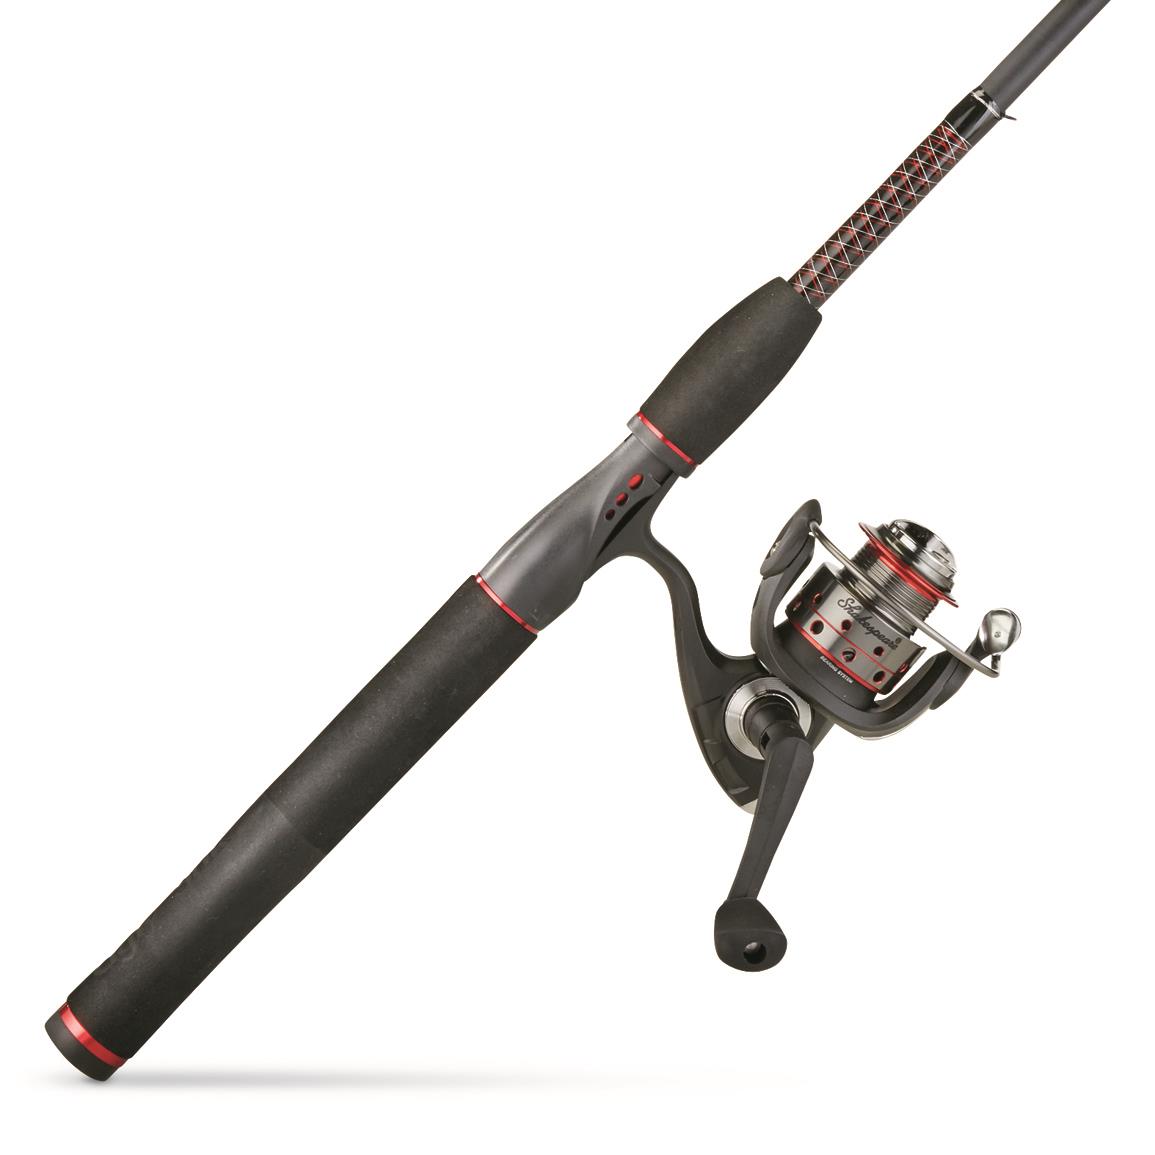 Shakespeare Ugly Stik Gx2 Travel Spinning Fishing Rod and Reel